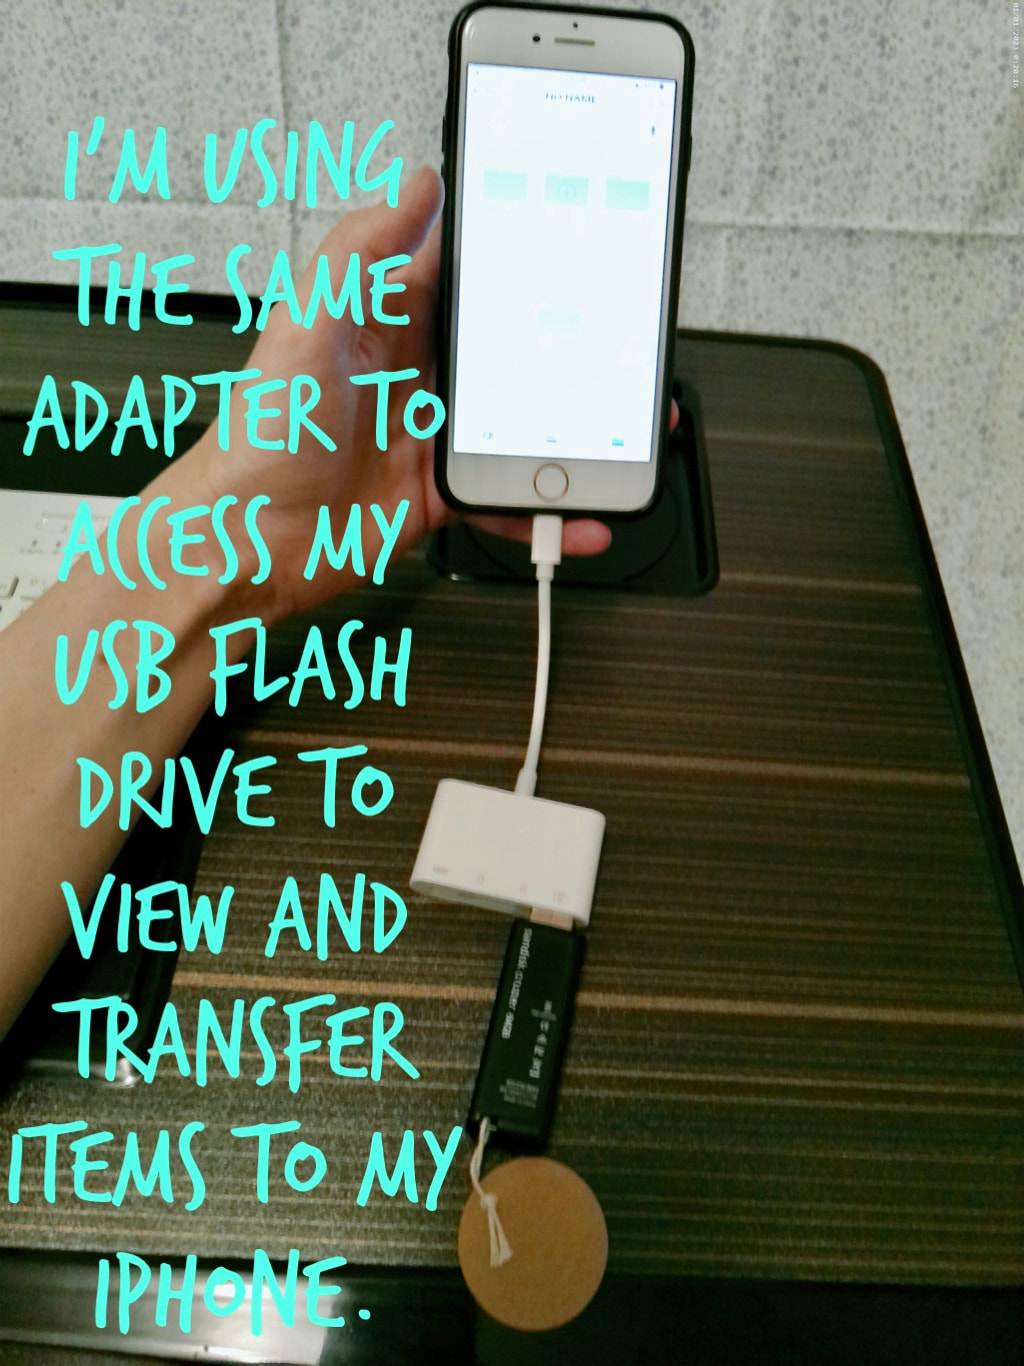 Adapter for iPhone to use USB flash drive. 